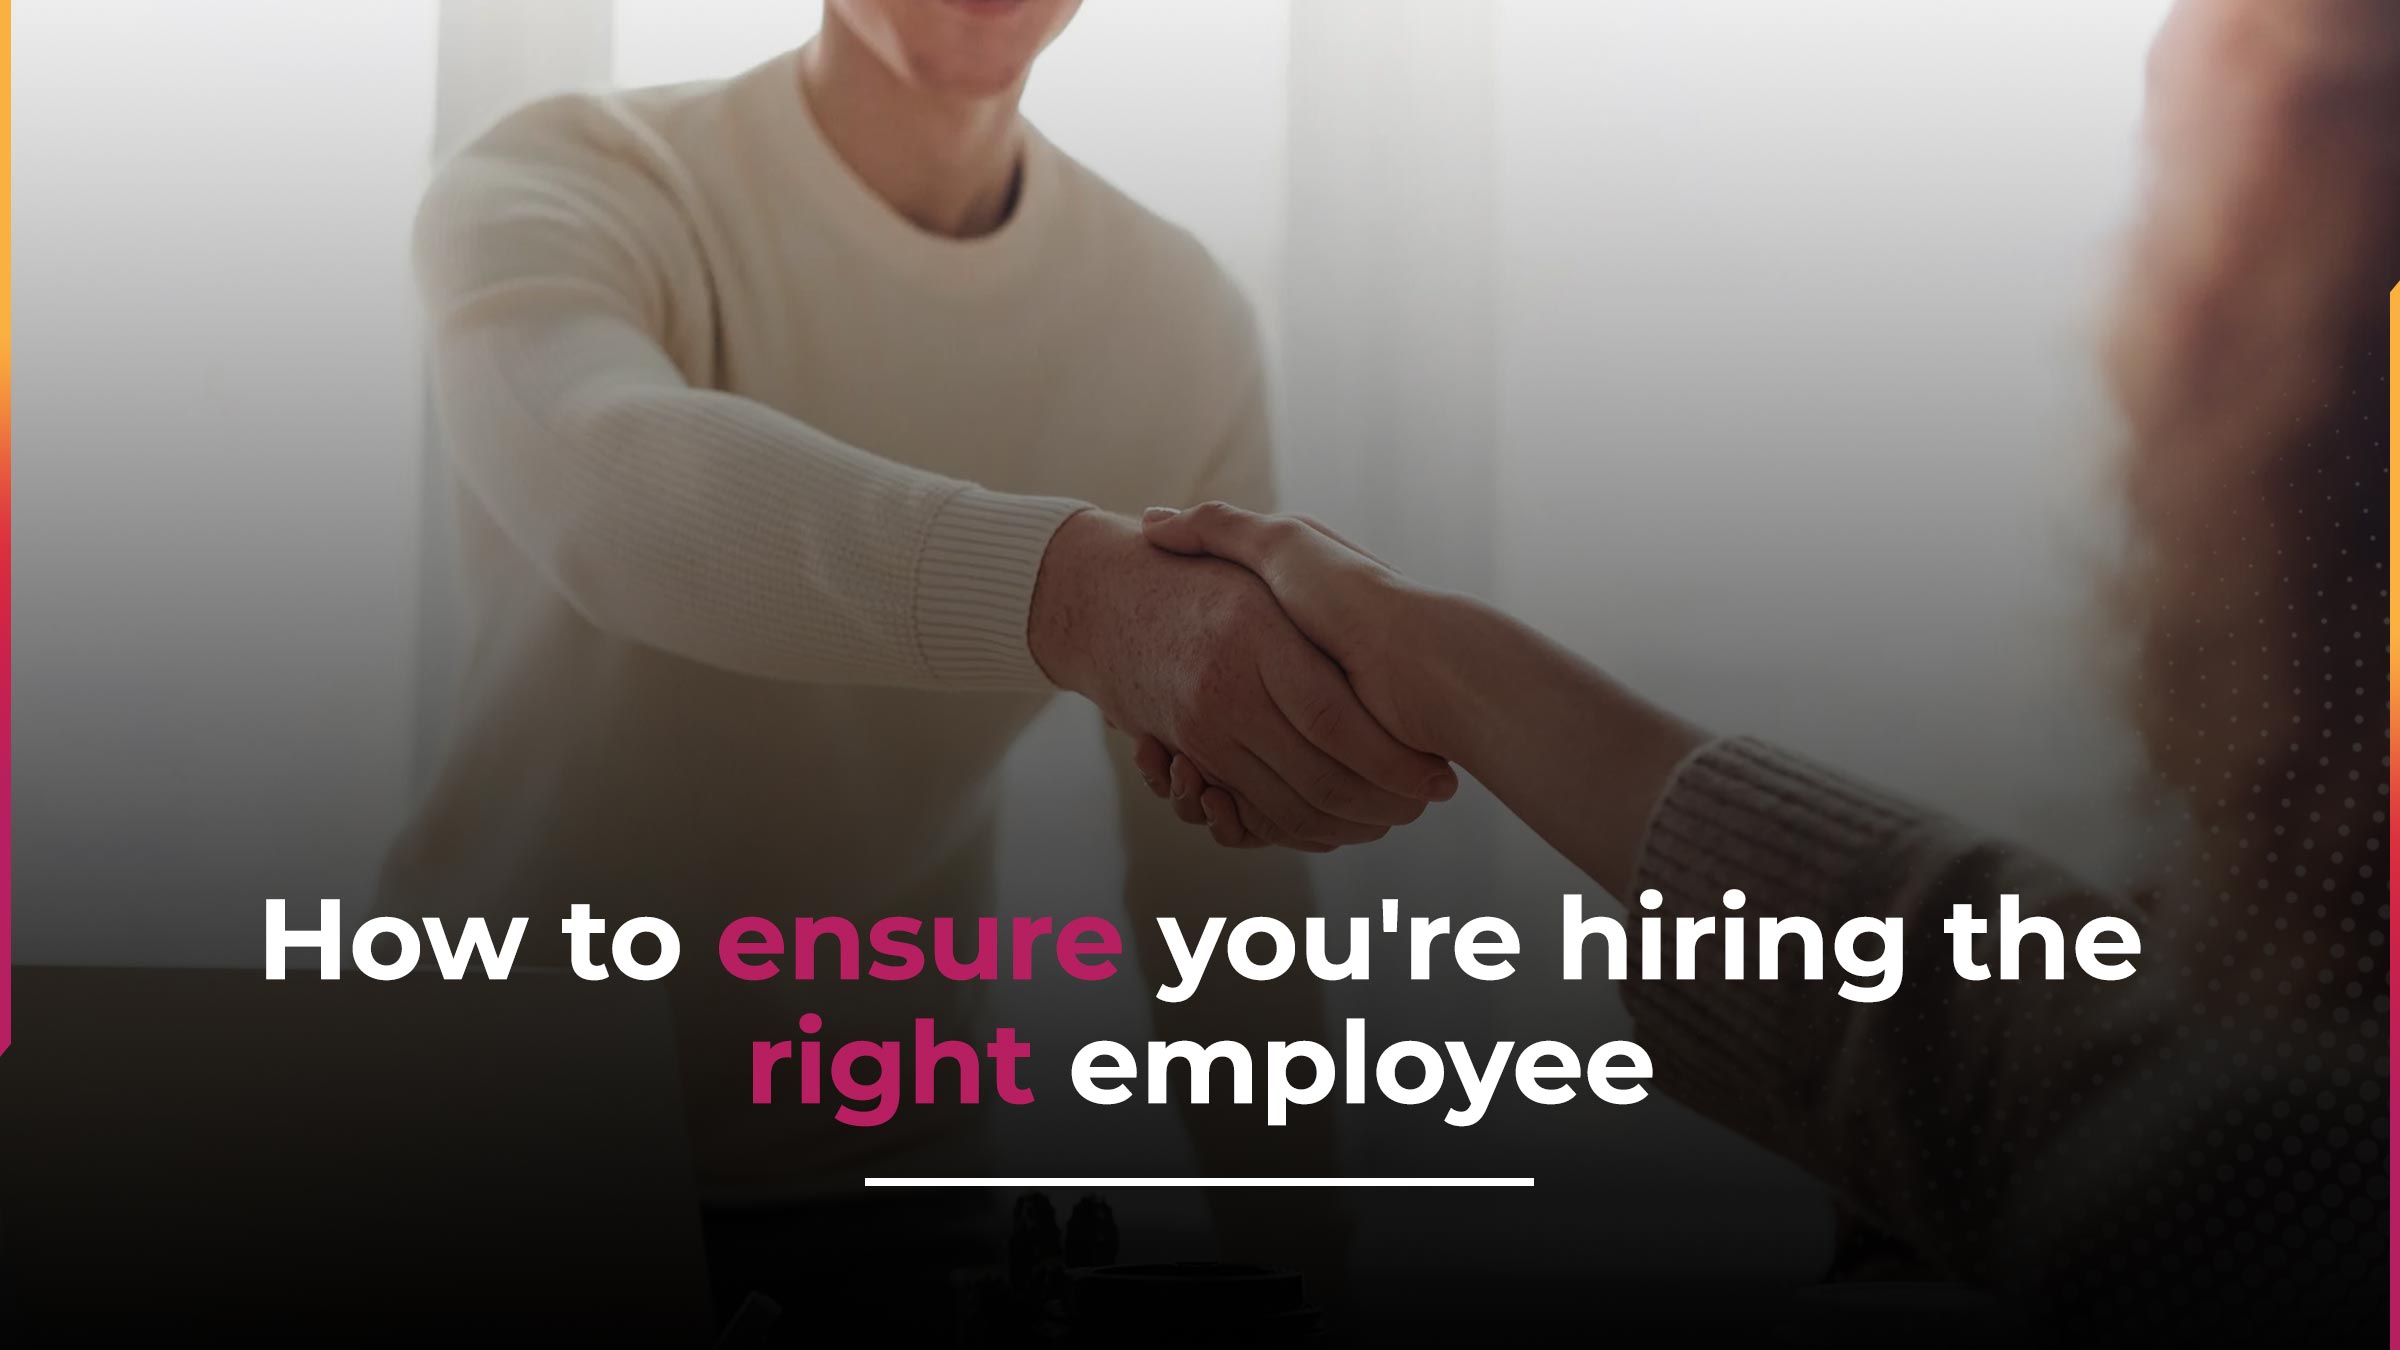 7 Tips To Hiring The Right Person In Australia